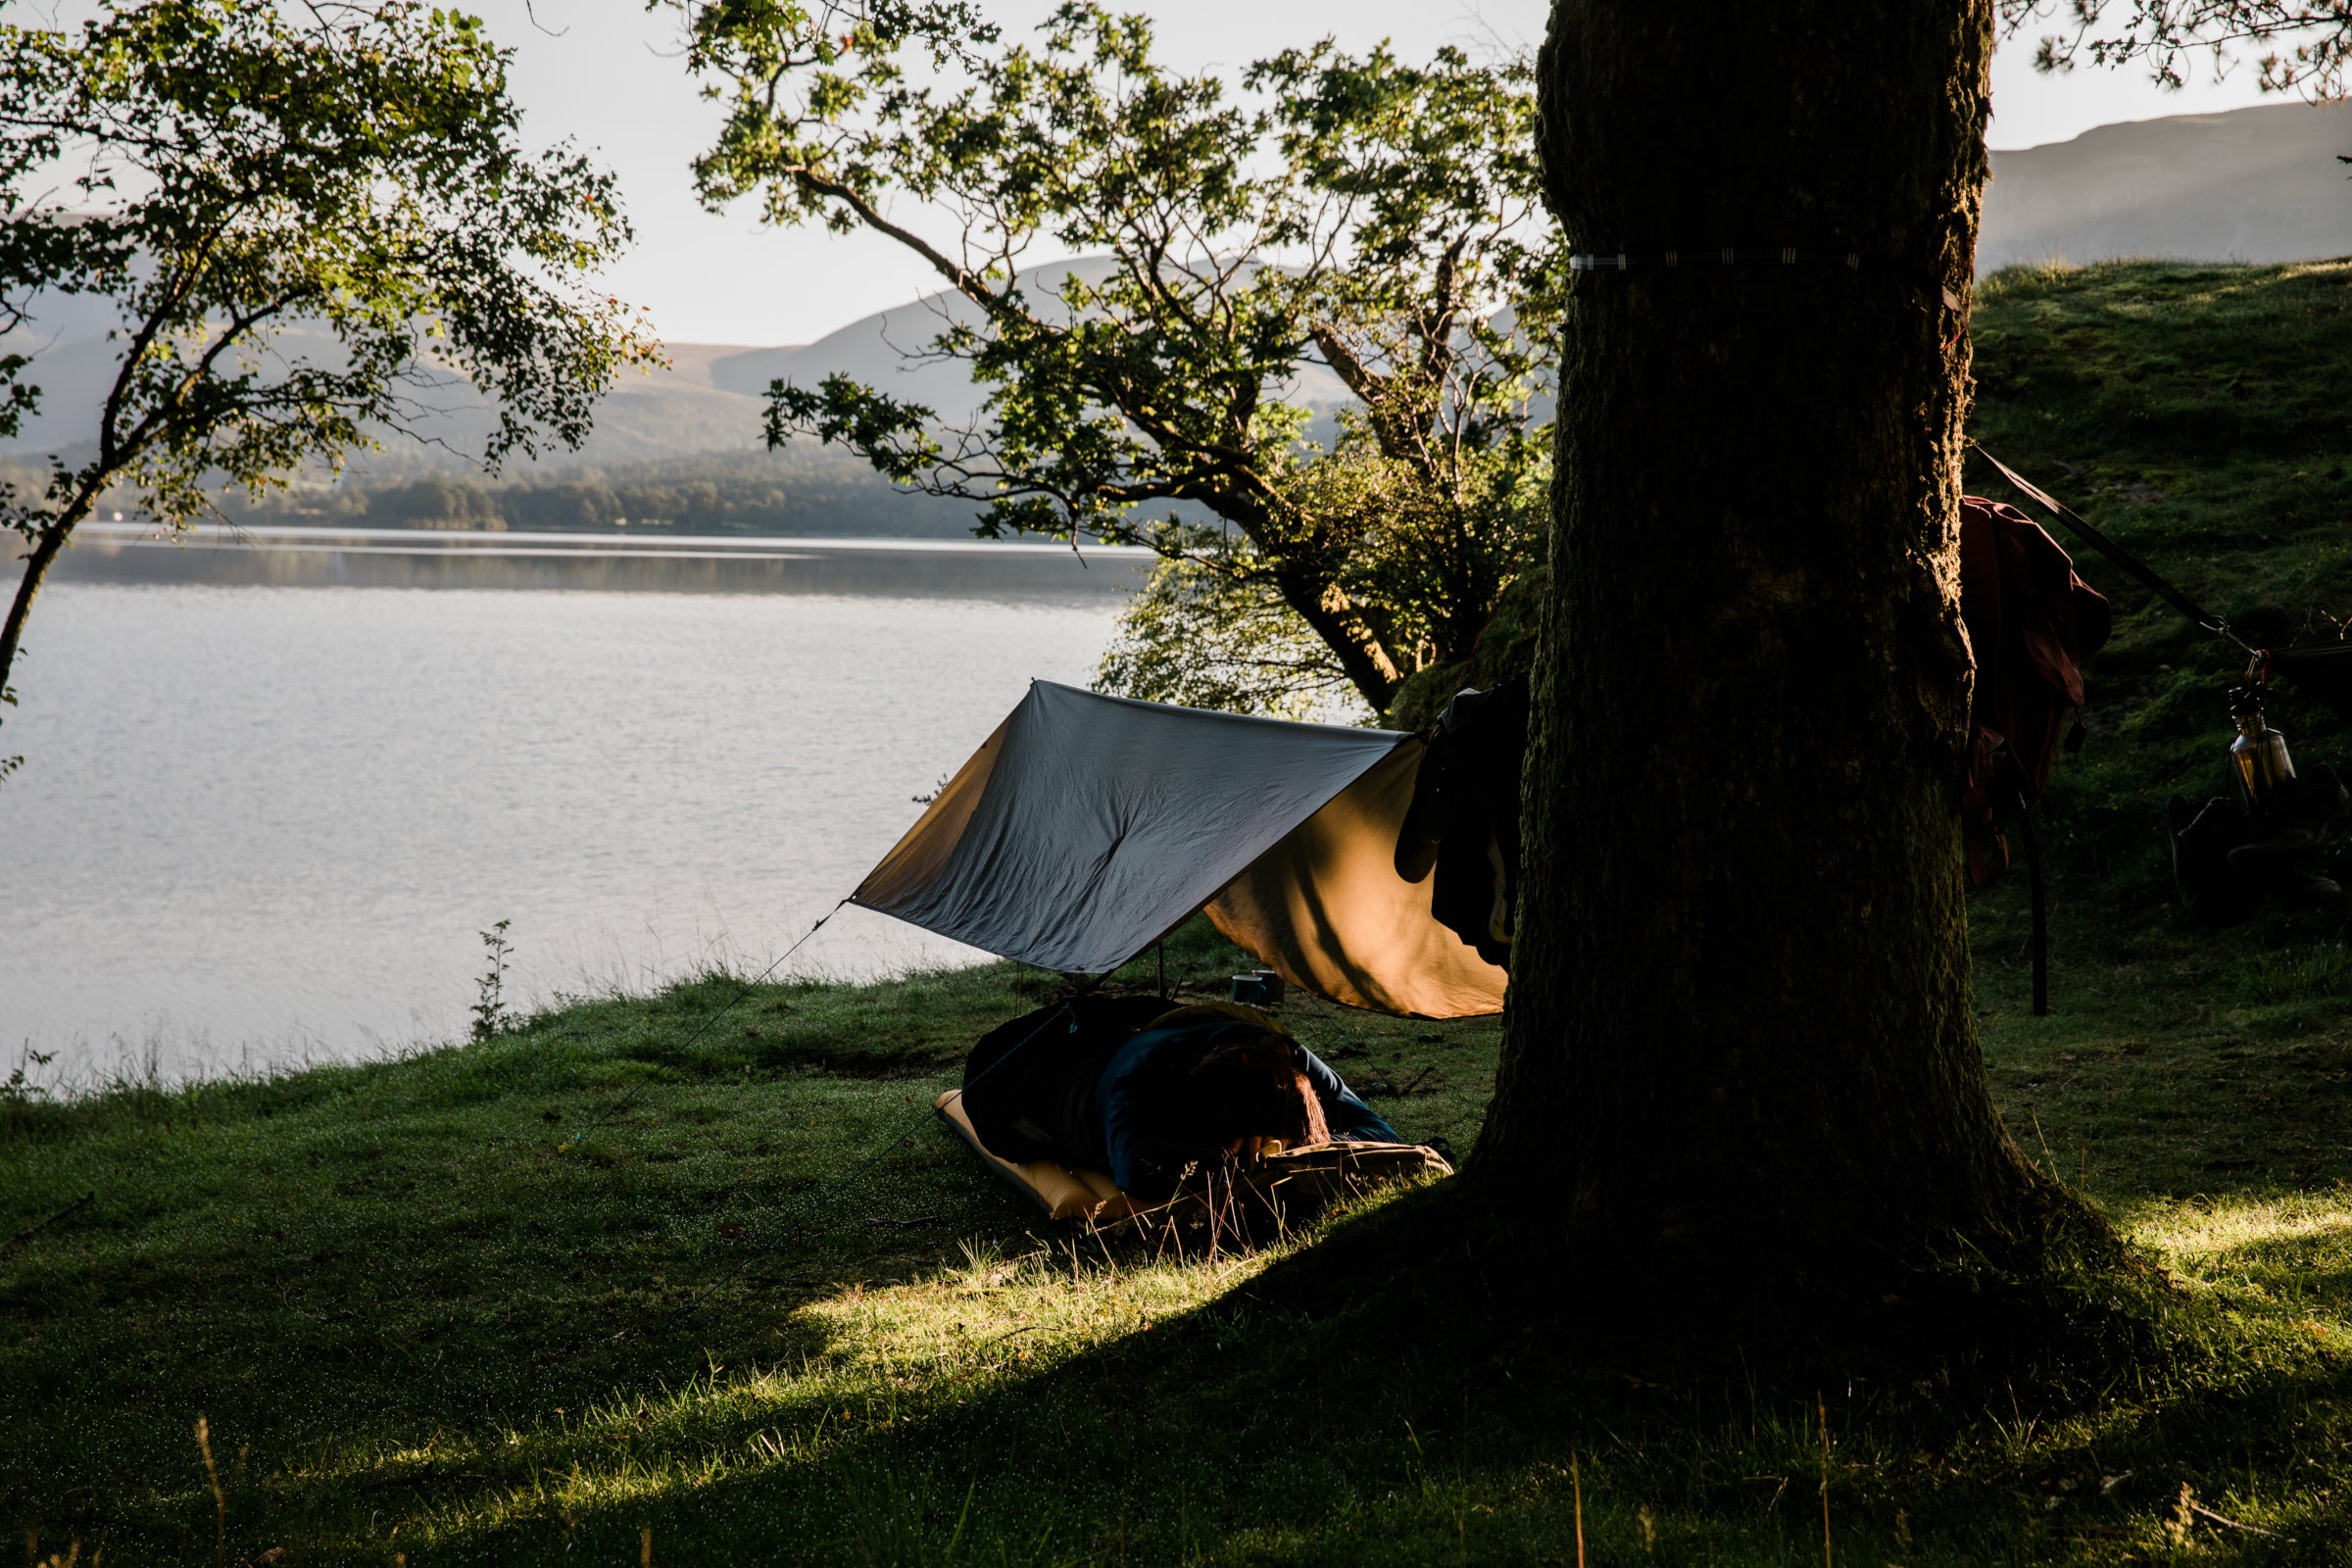 Millican | A hammock with a tarp hung between trees overlooking a tranquil lake at sunset, with clothes hanging on a line and outdoor gear scattered around, creating a serene camping scene.